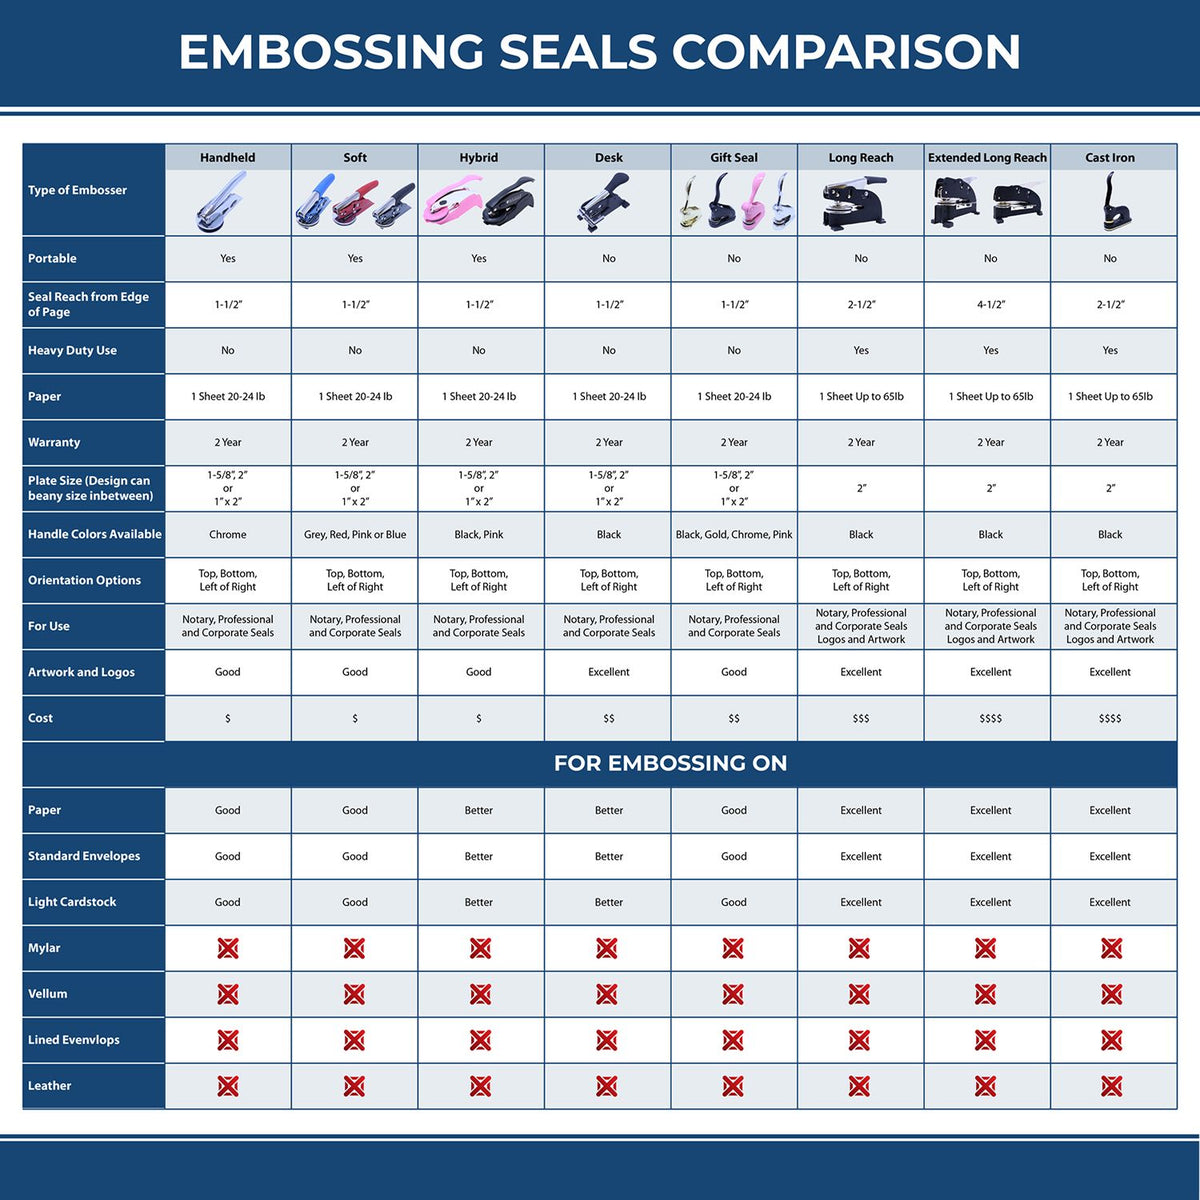 A comparison chart for the different types of mount models available for the Handheld Maryland Architect Seal Embosser.